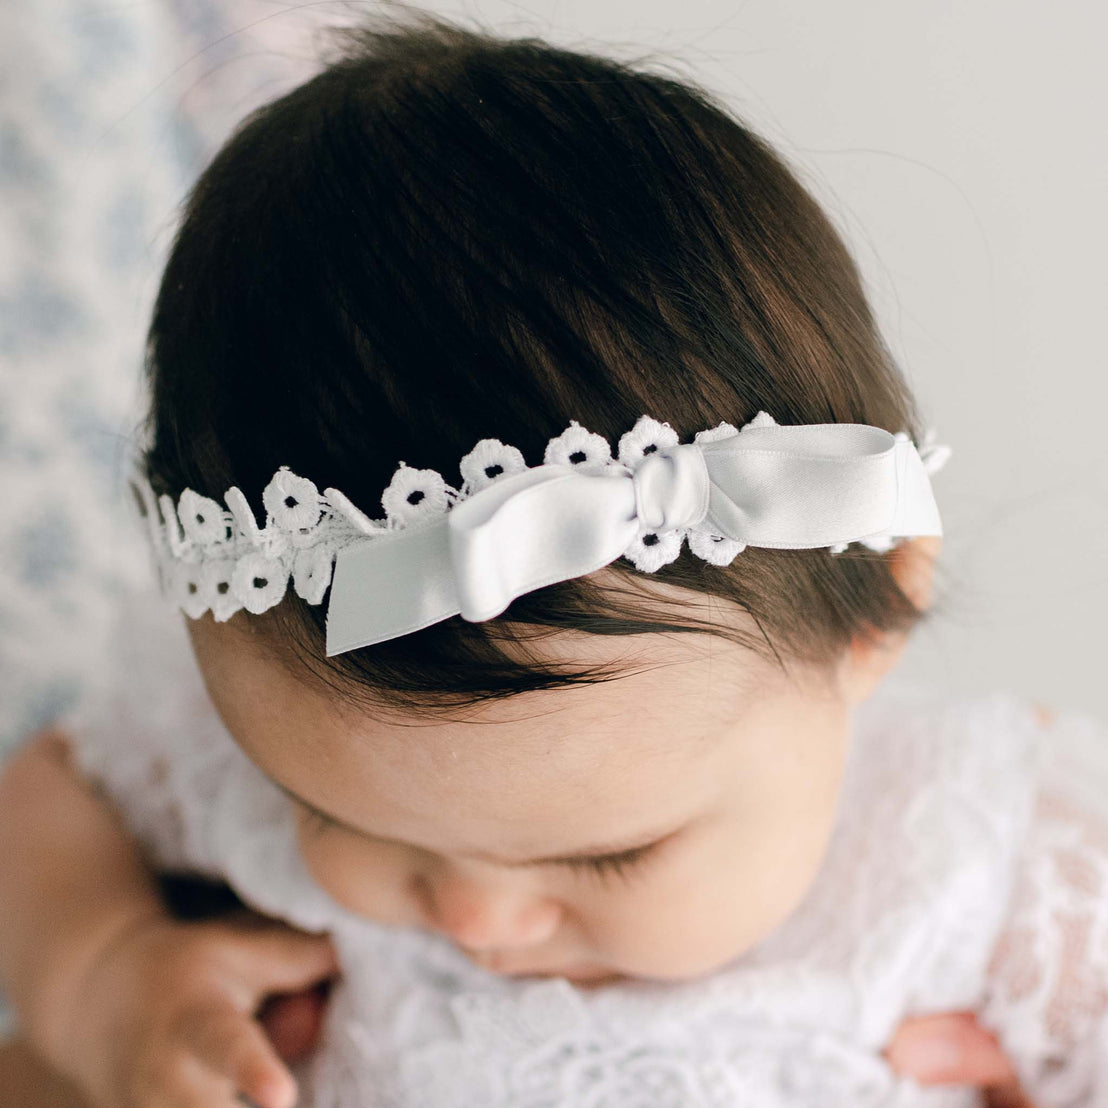 Close-up of a baby with dark hair wearing the Olivia Headband, looking downward. The background is softly blurred.